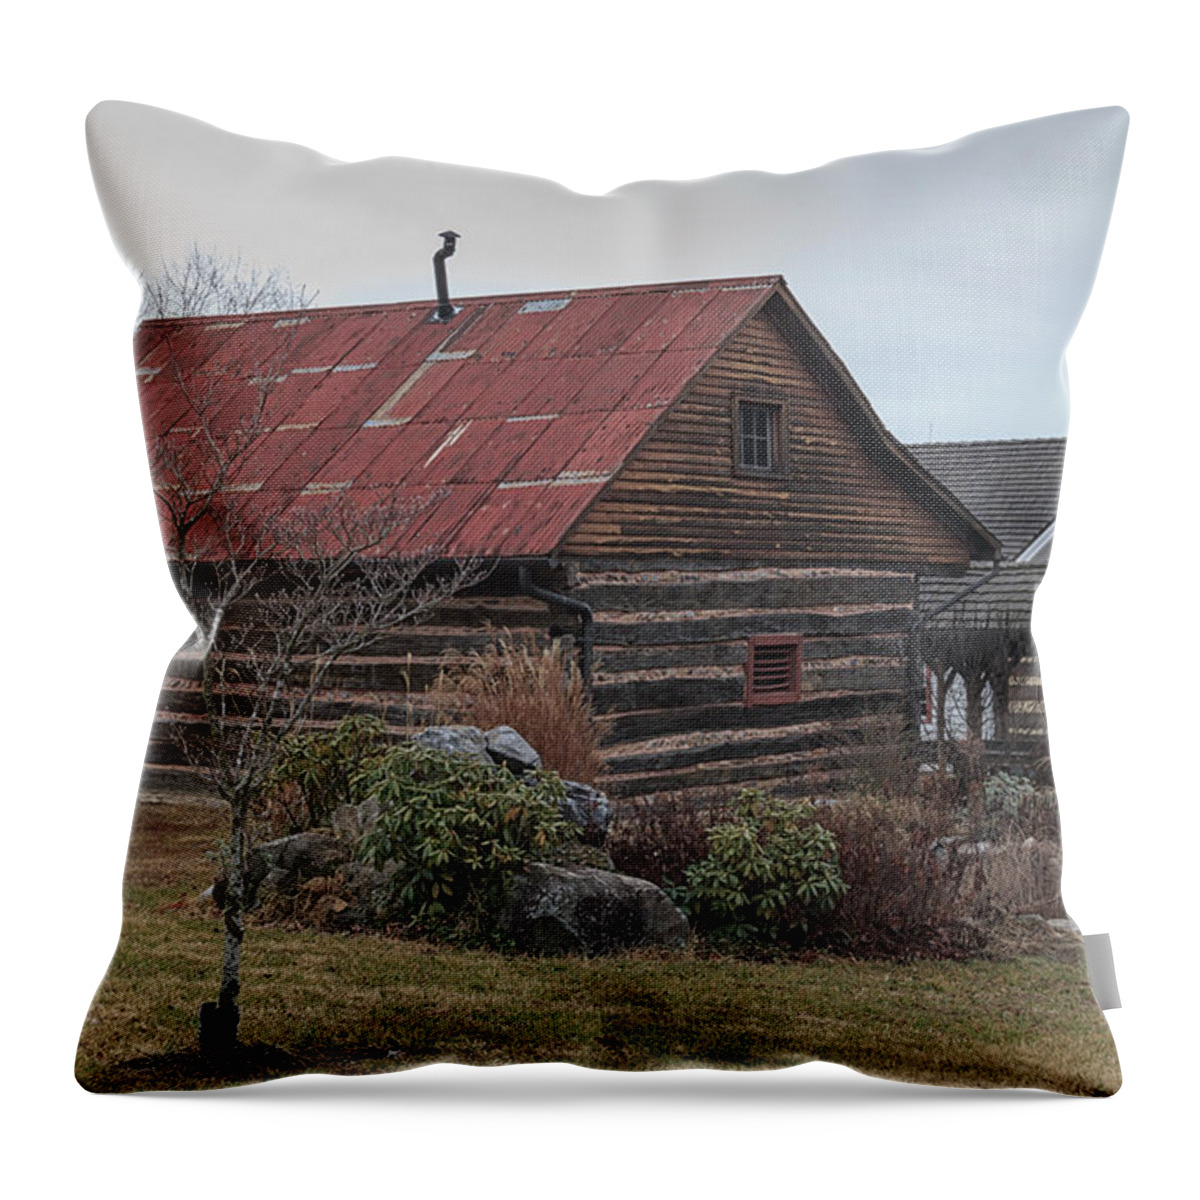 Wood Throw Pillow featuring the photograph Wooden Barn by Travis Rogers